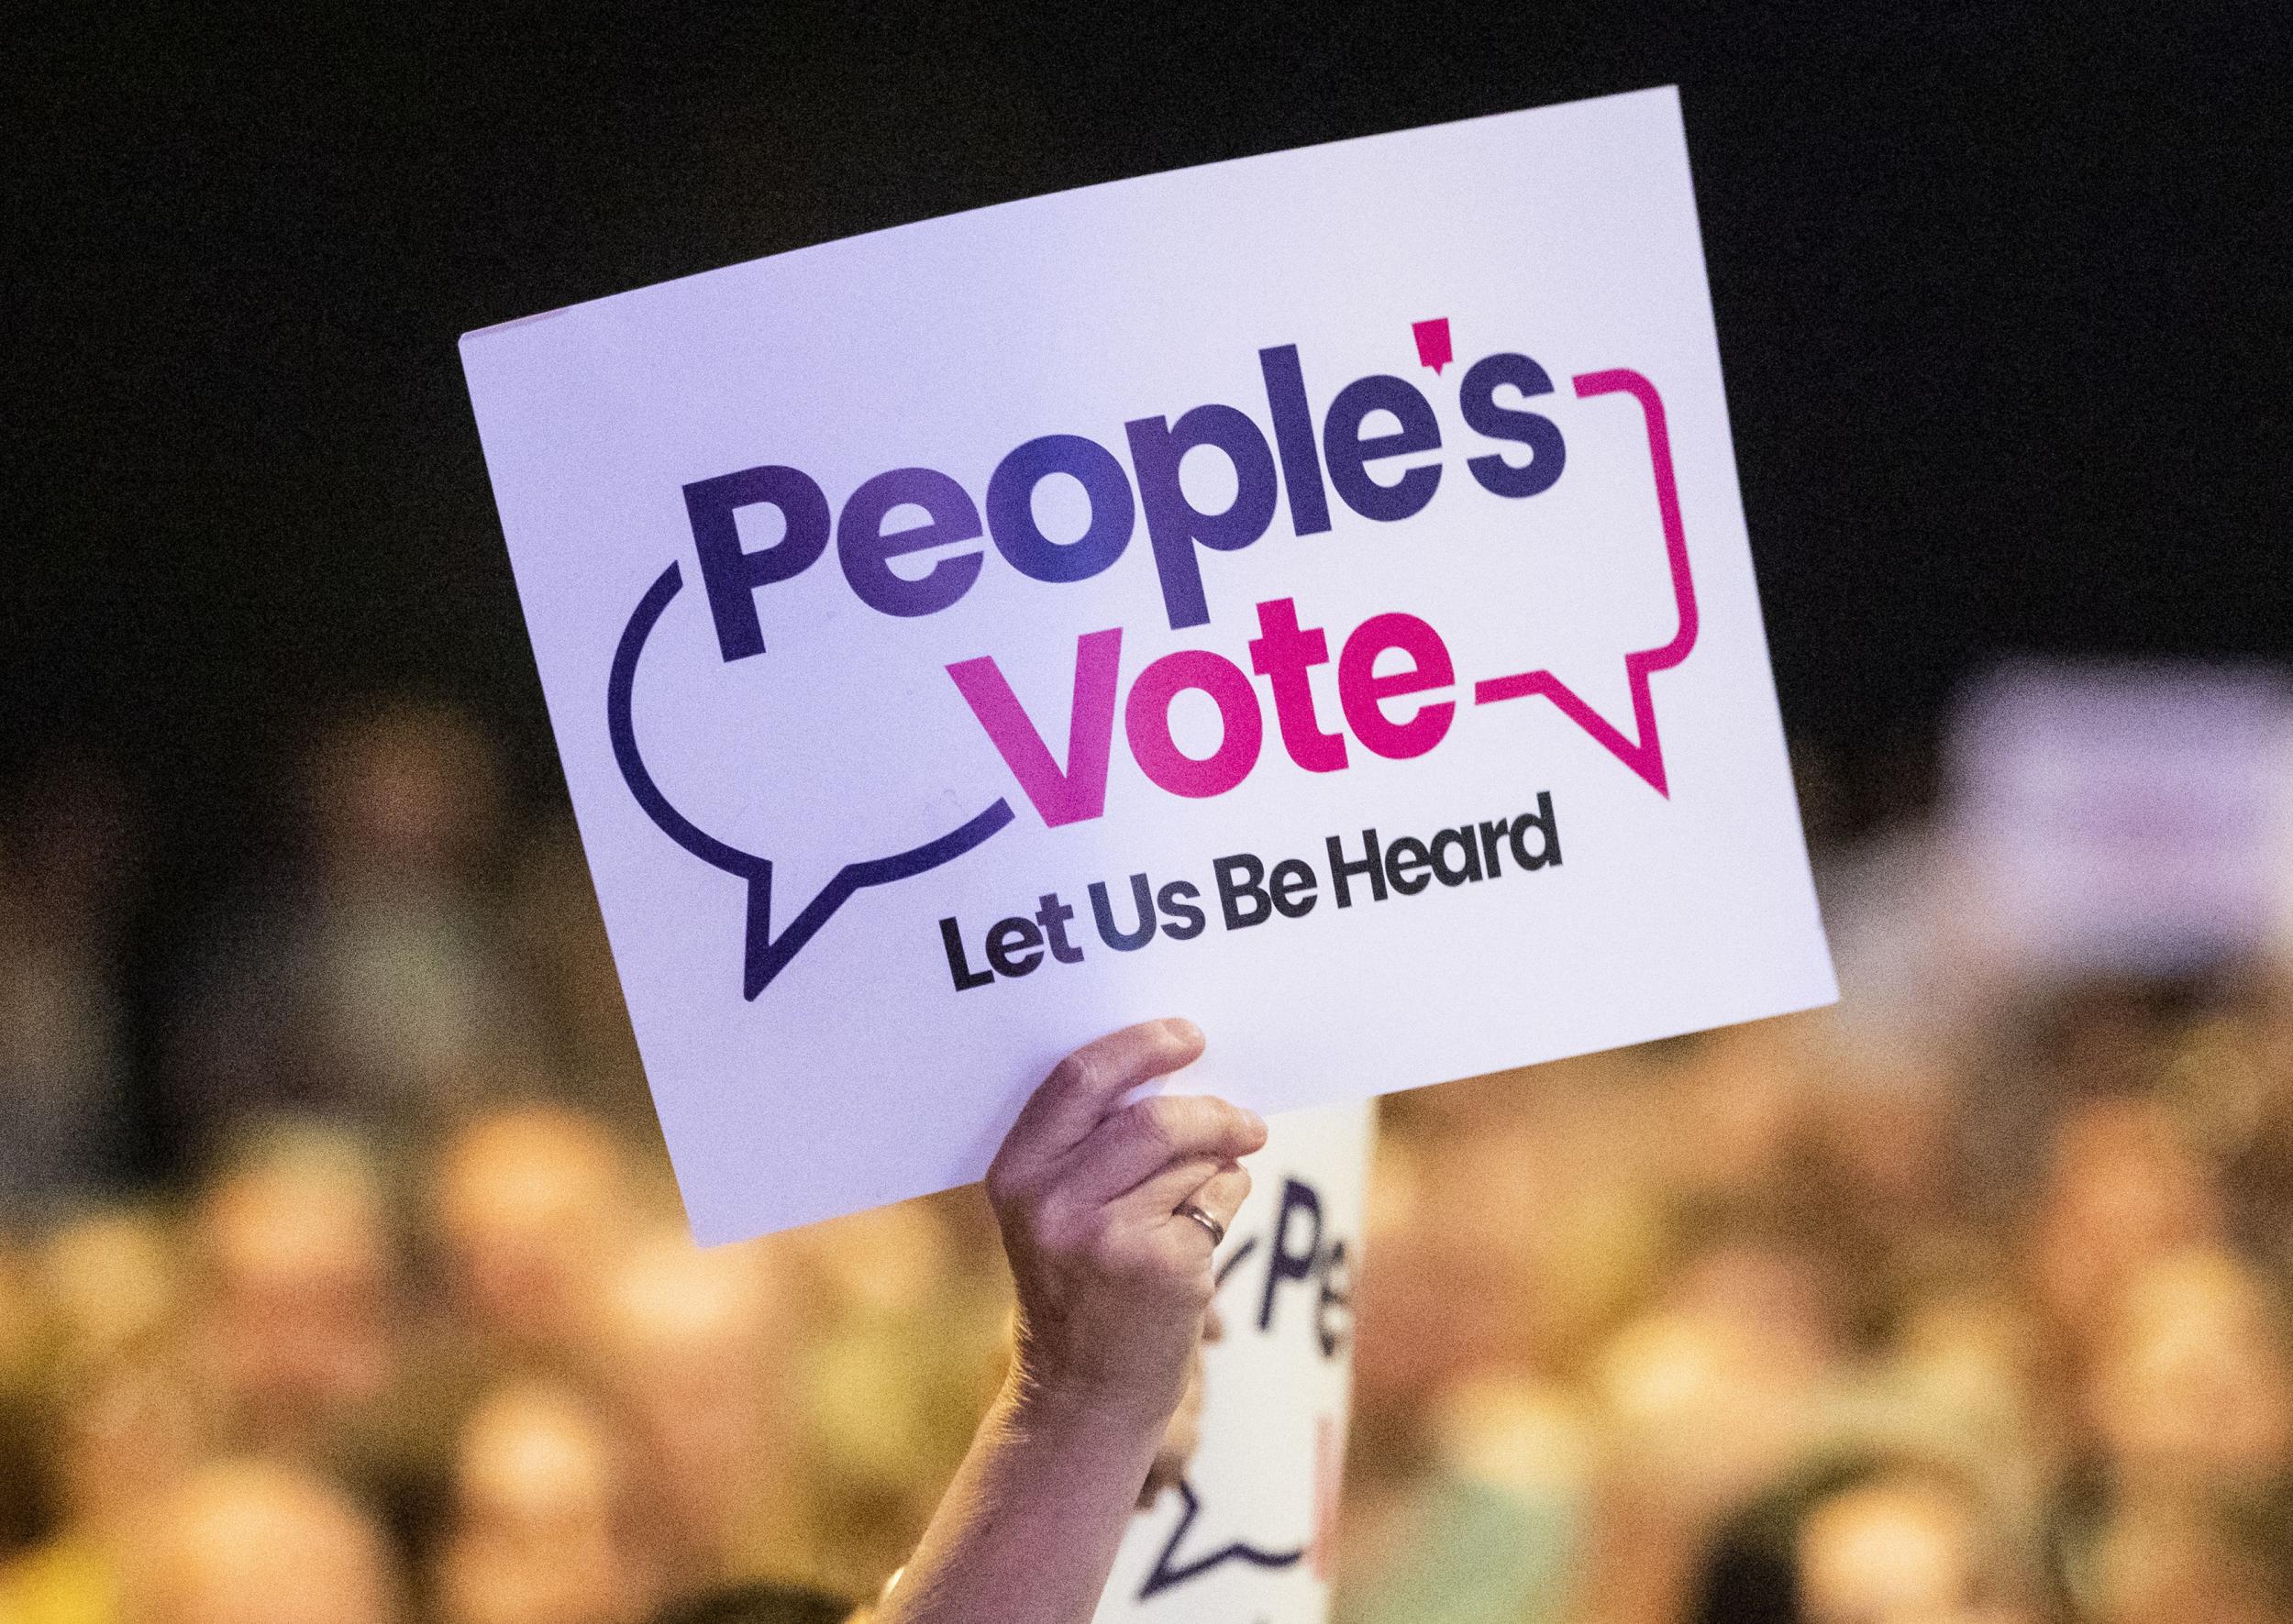 People&apos;s Vote chief executive steps down following sexual harassment allegations